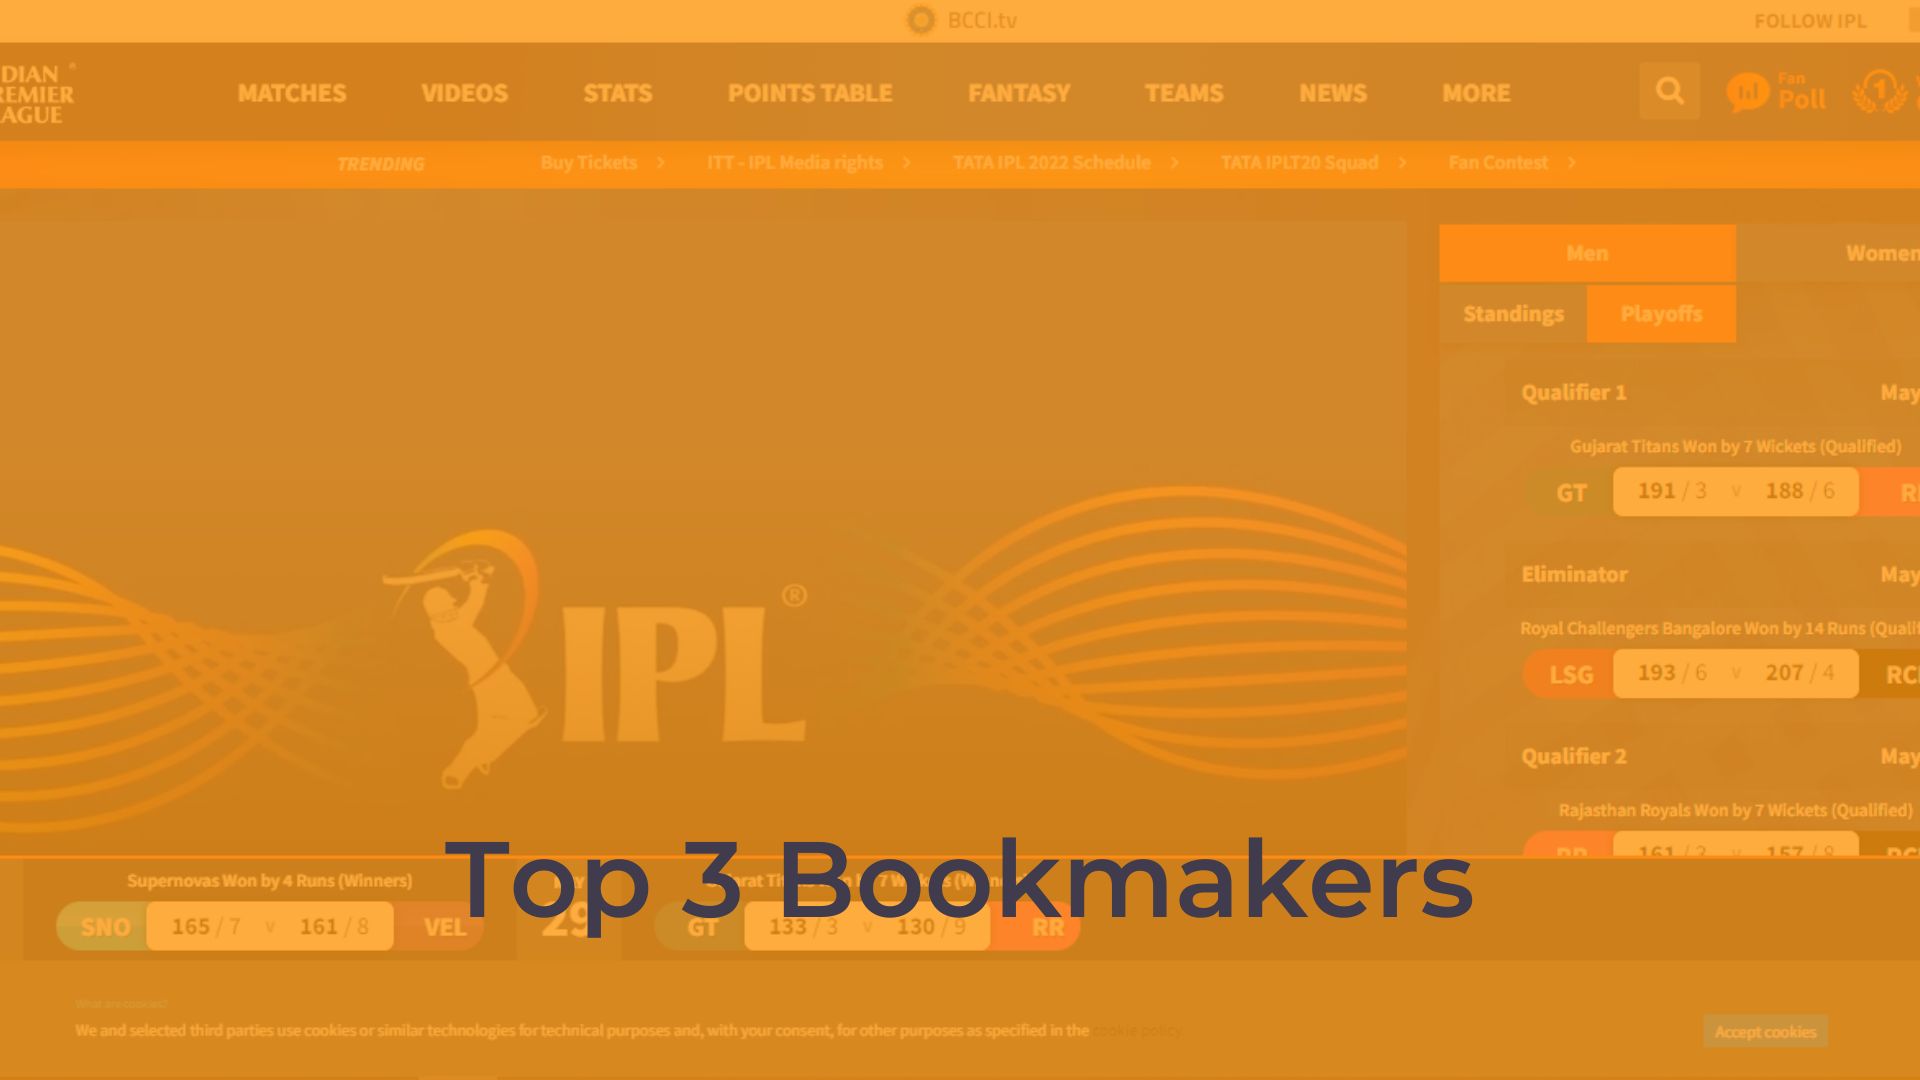 Spotlight on IPL Betting: A Deep Dive into the Top 3 Bookmakers